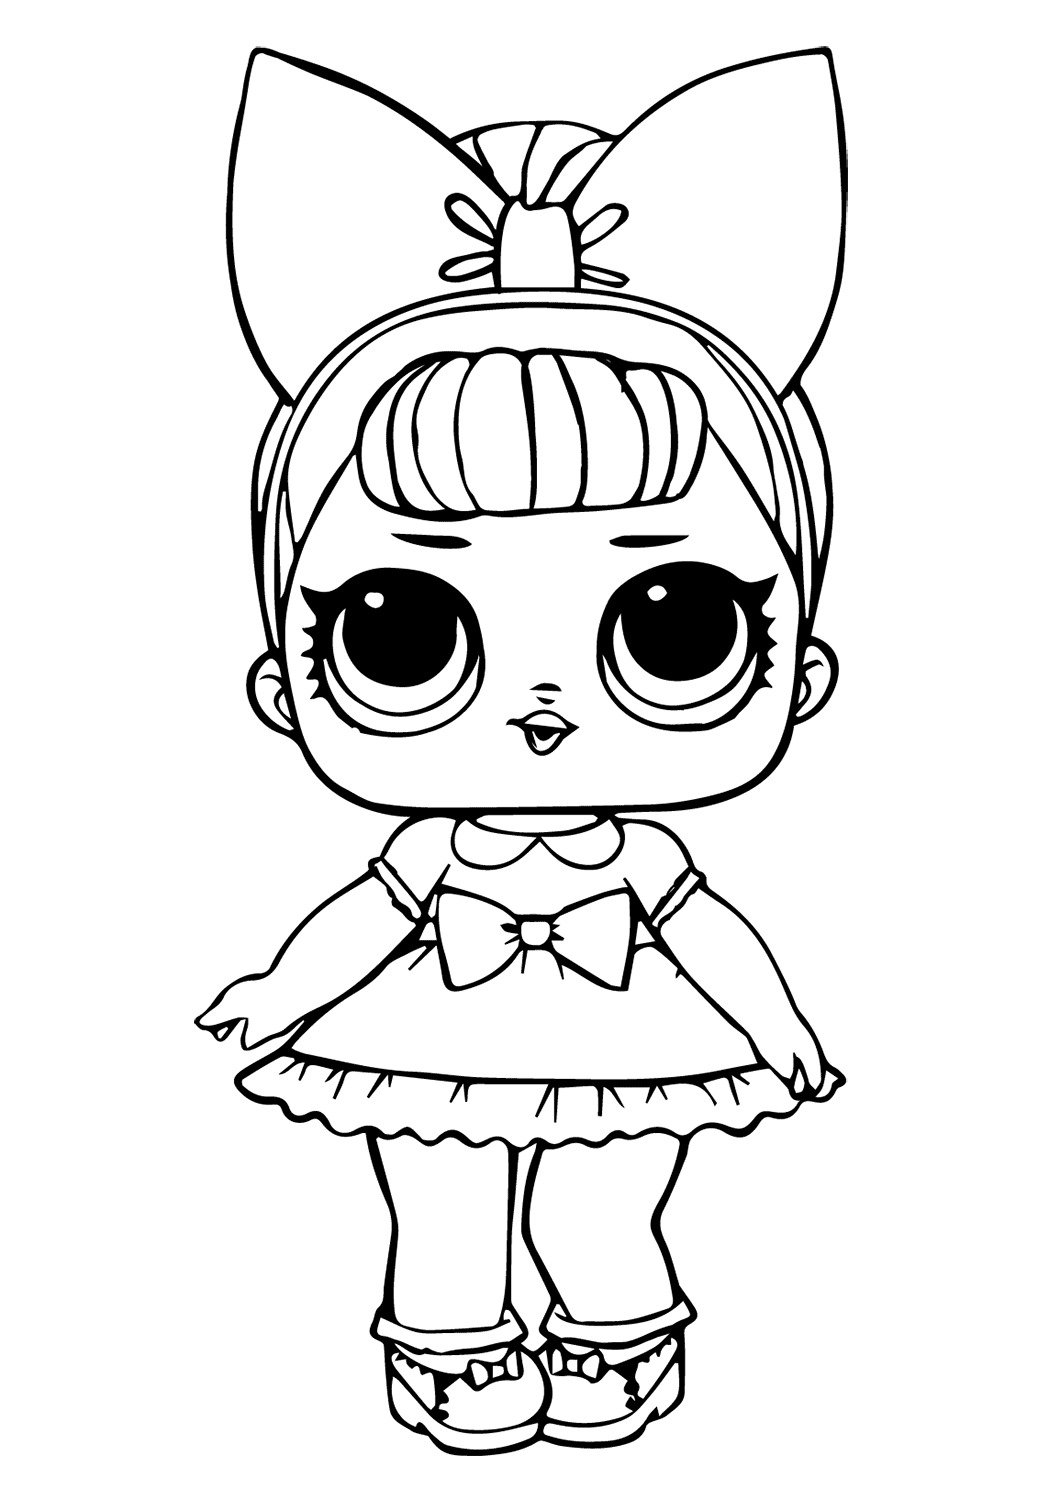 Lol Suprise Doll Fancy Glitter Coloring Pages   Lol Surprise Doll ...